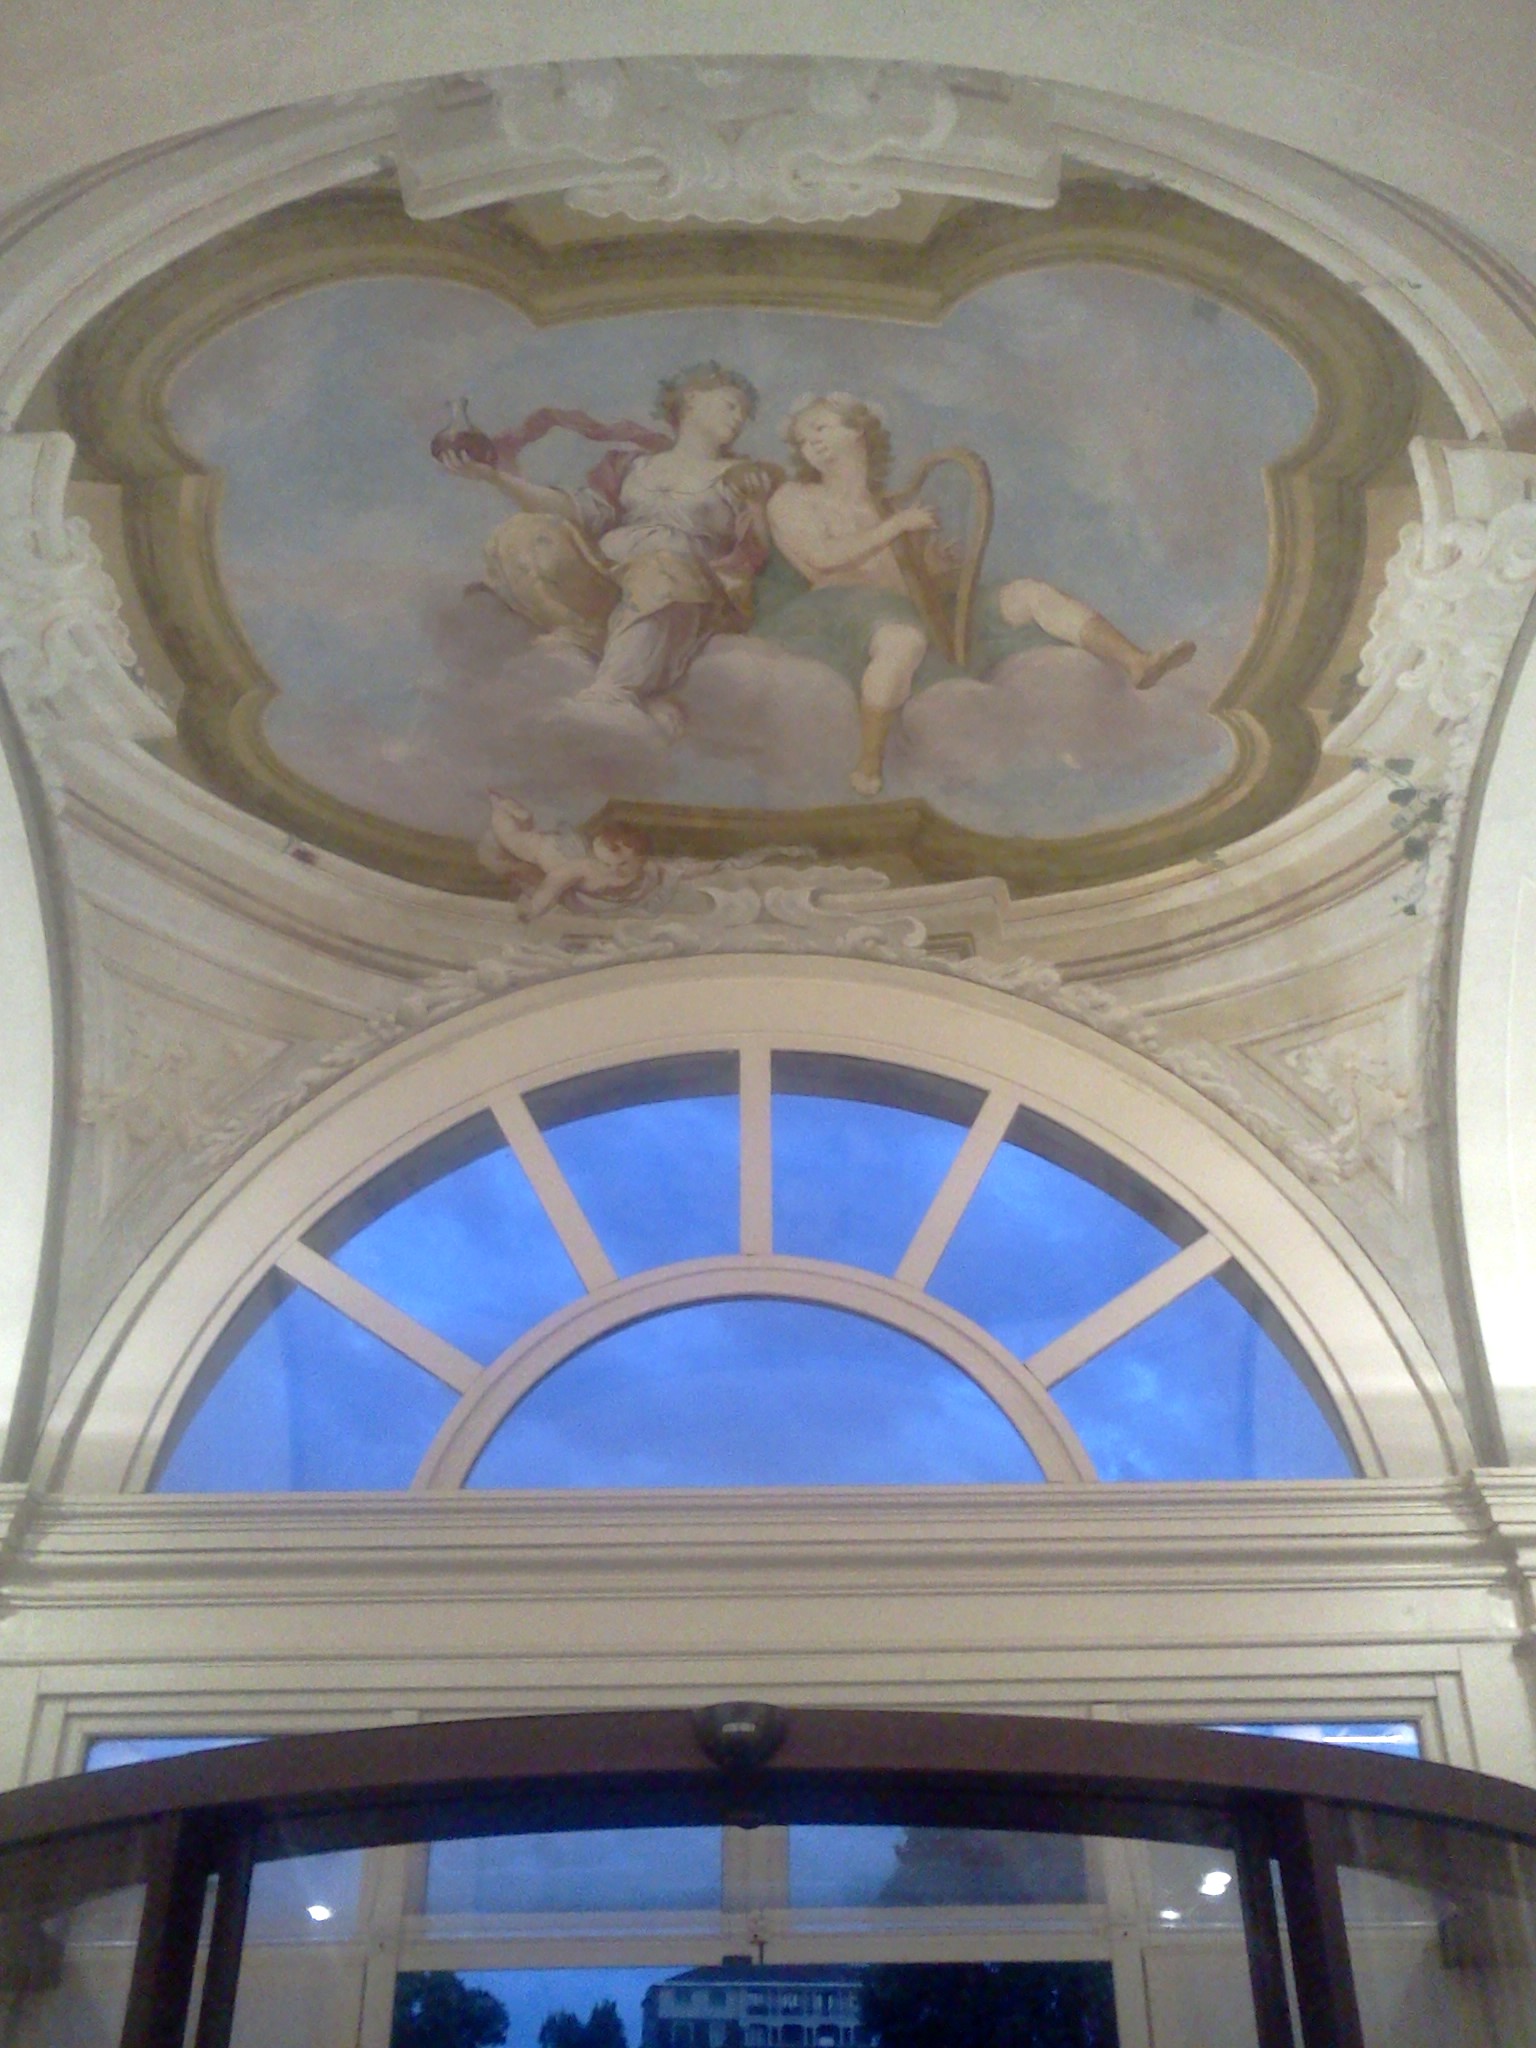 the entrance area of a building with a view of two sculptures on the ceiling